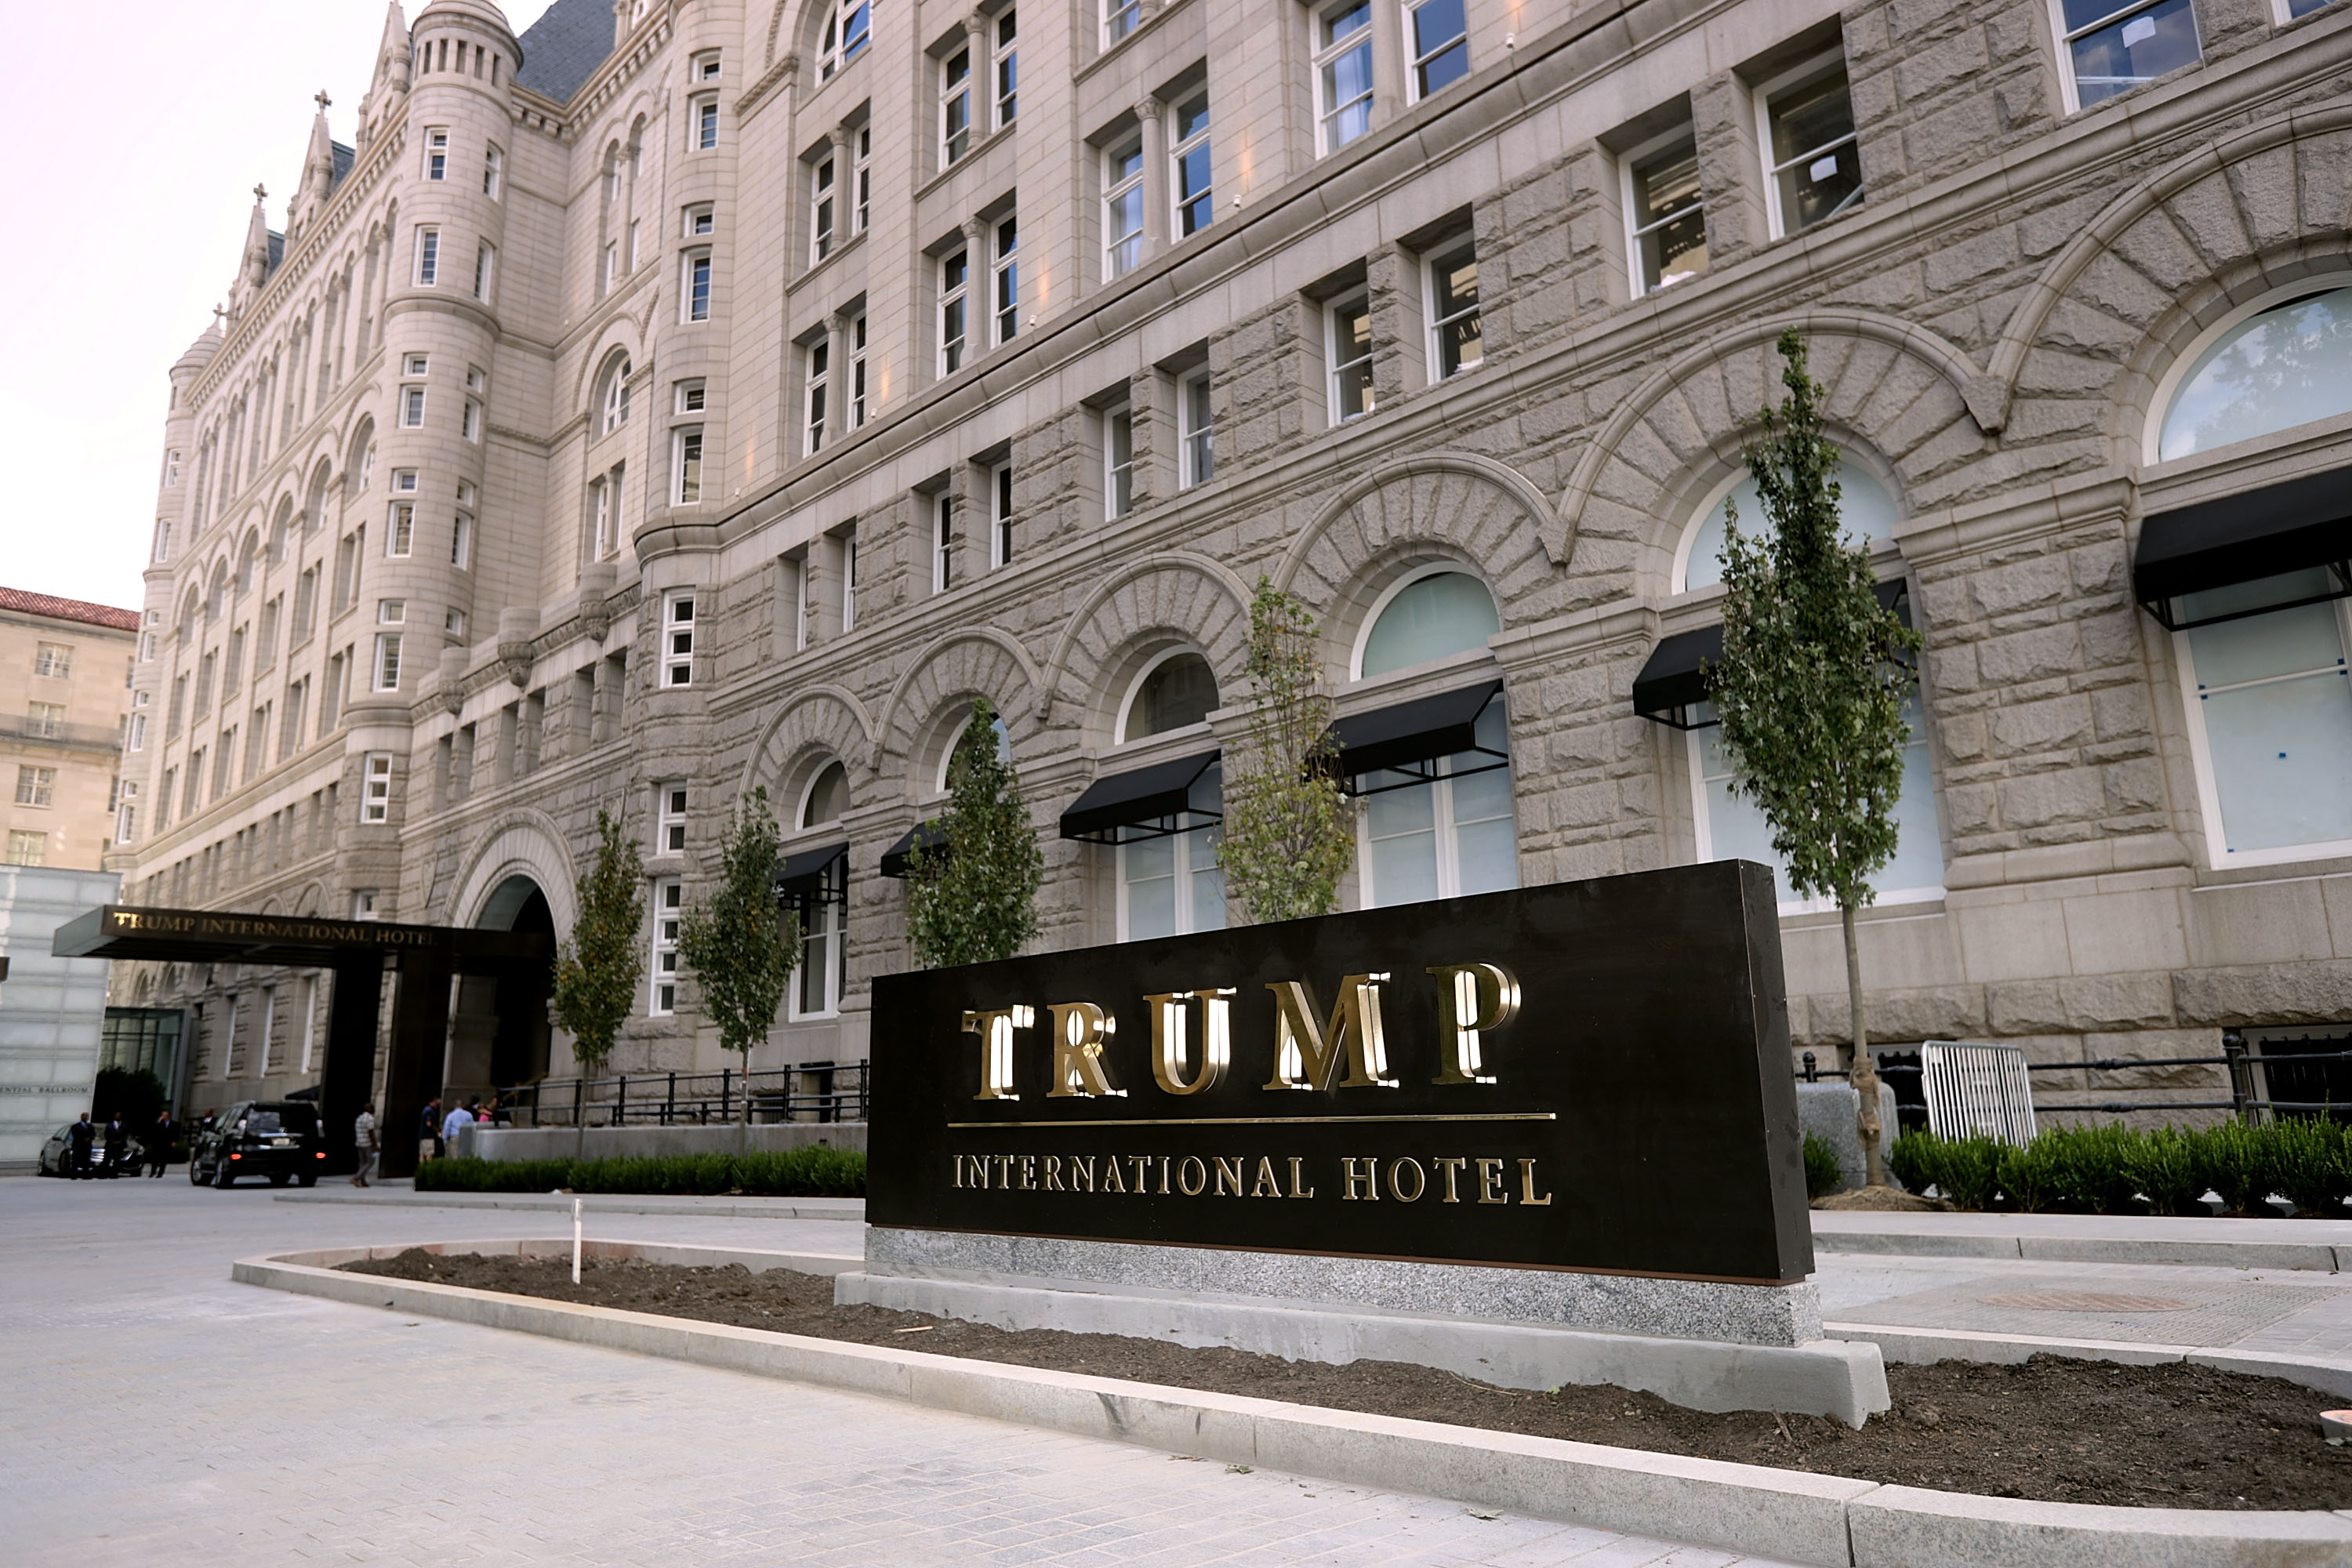 The Trump International Hotel in Washington, D.C. as seen on September 12, 2016. (Chip Somodevilla/Getty Images)